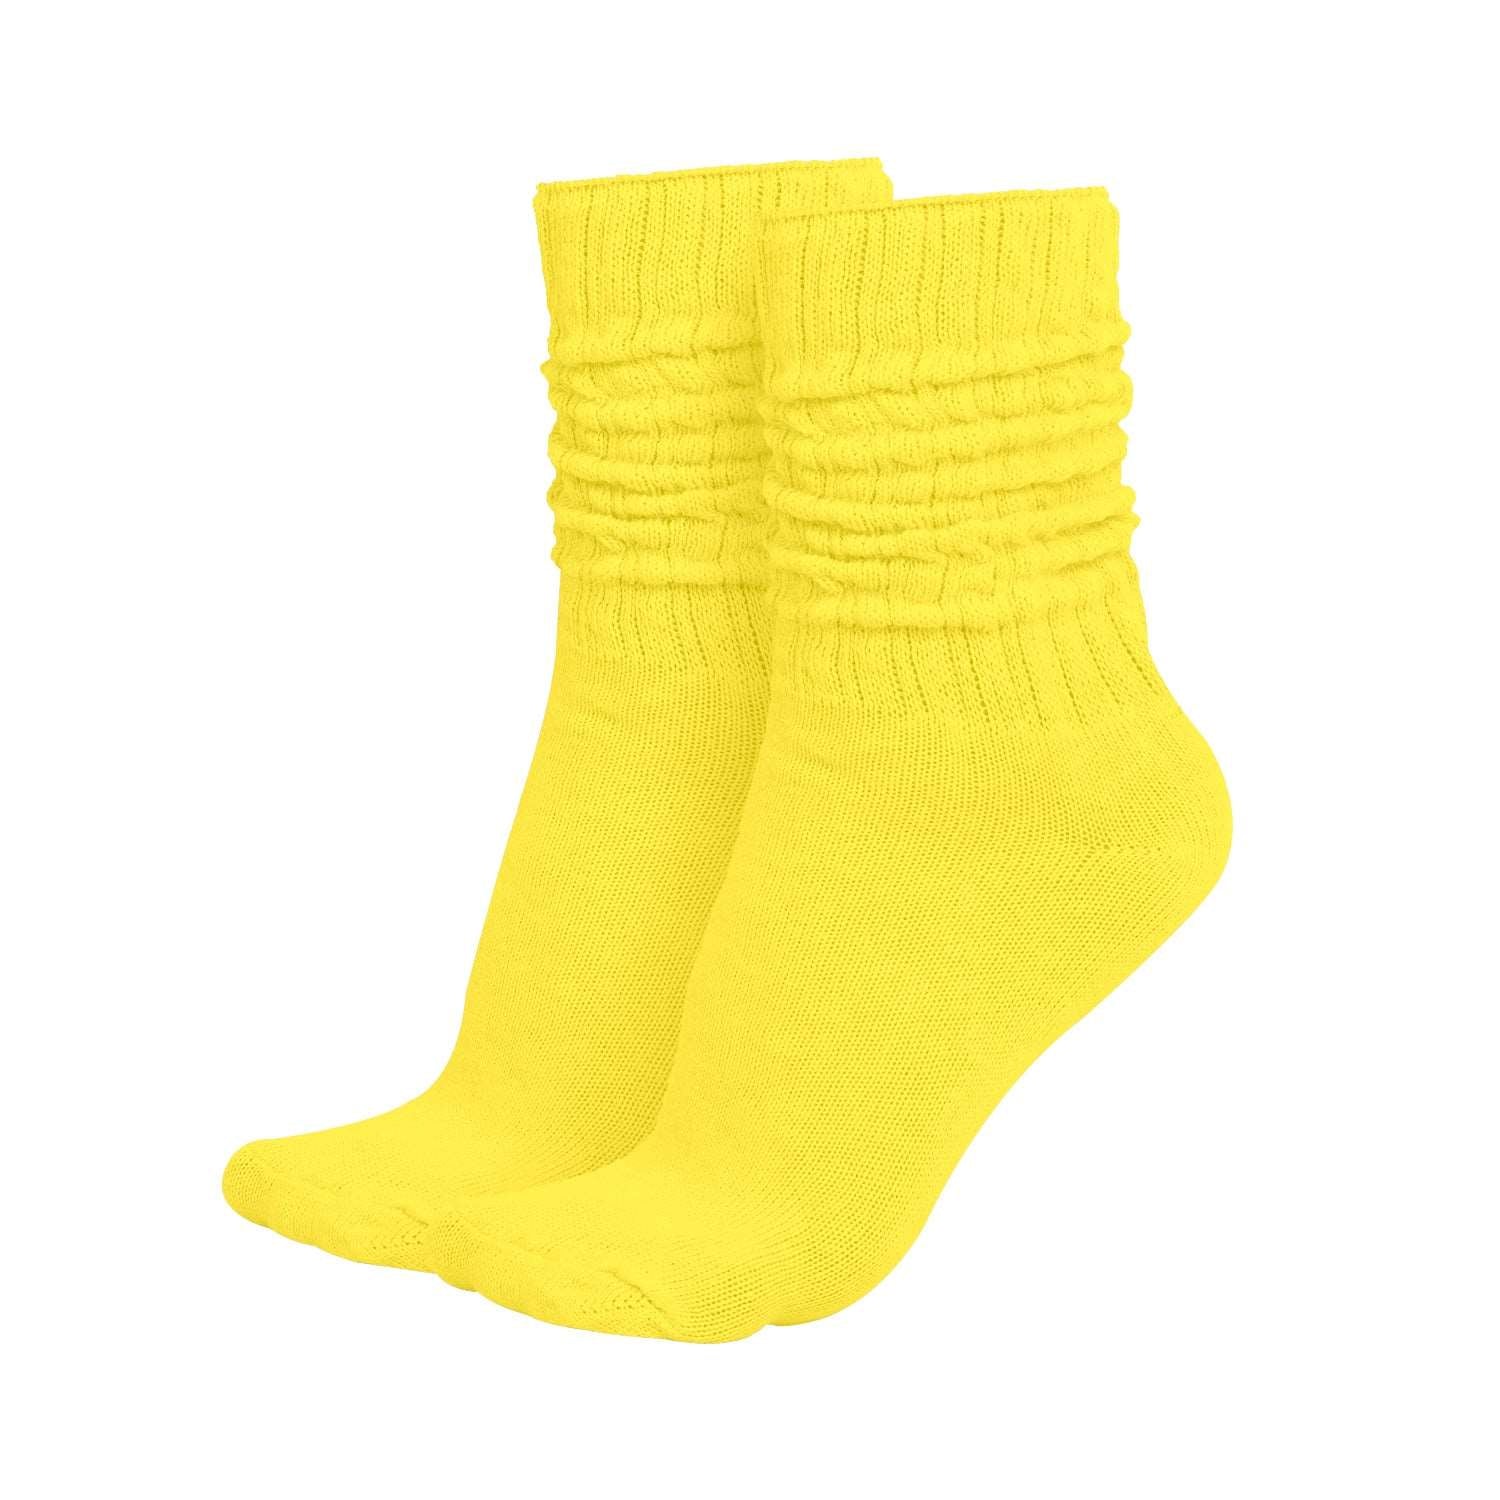 MDR Lightweight Cotton Slouch Socks For Women and Men 1 Pair Made in USA Size 9 to 11 (Yellow)